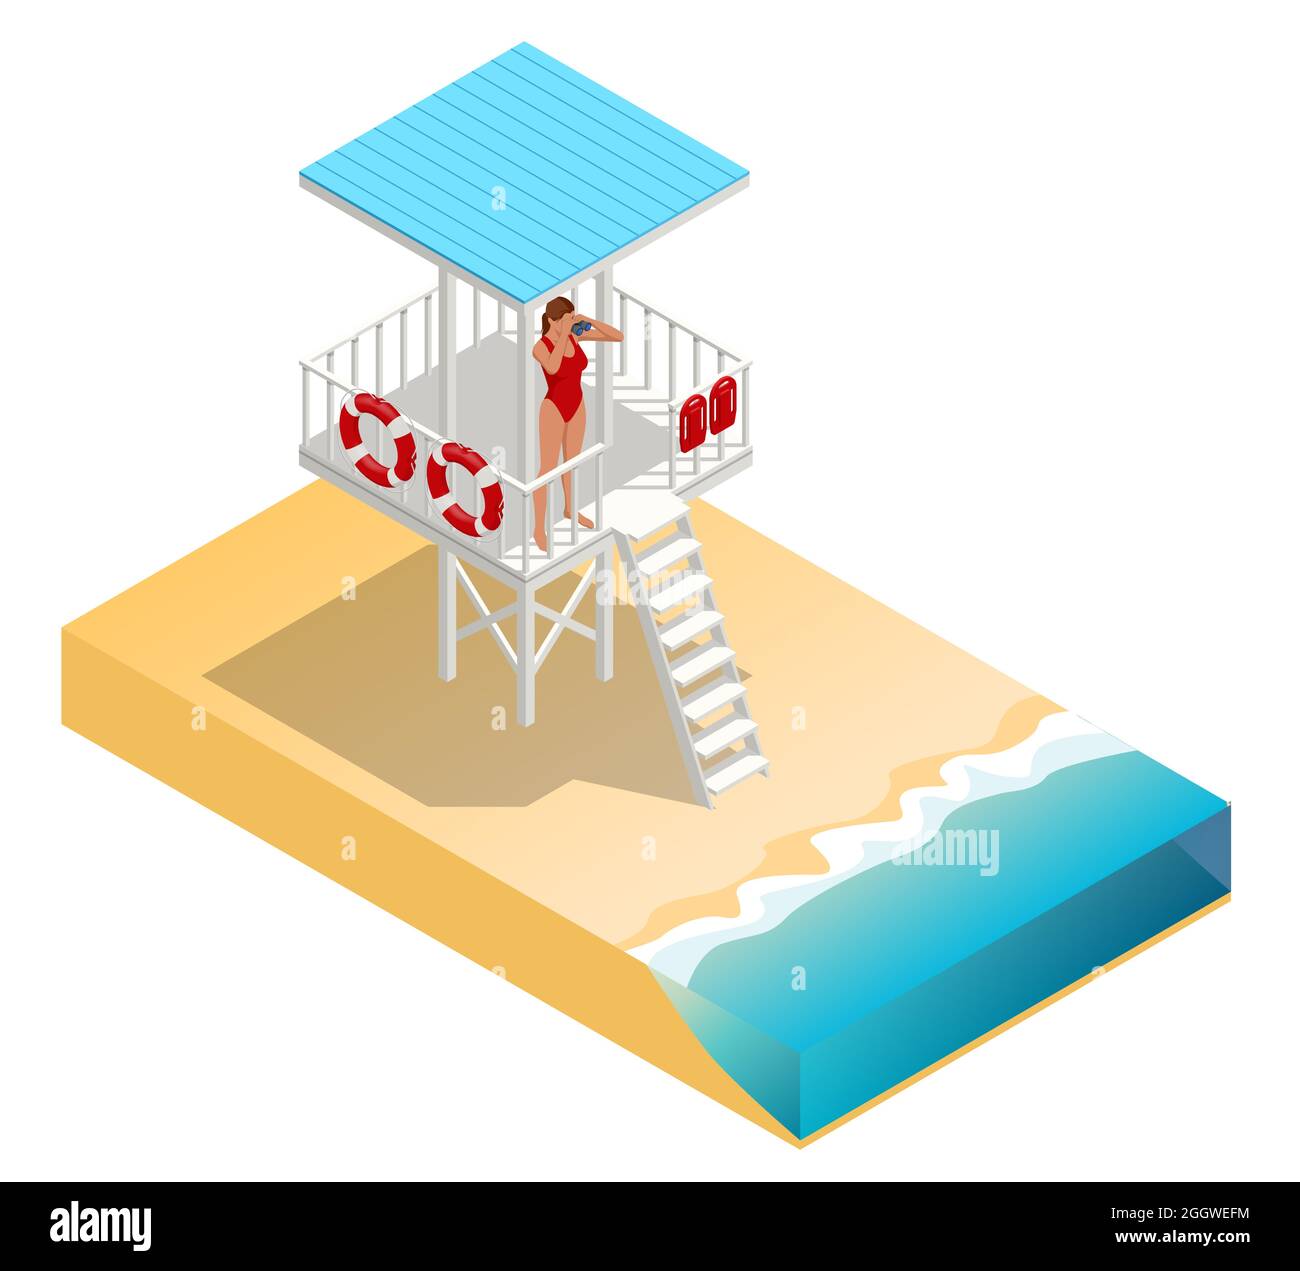 Isometric Watchtower on a Sandy Beach. Lifeguard on the beach. Safety while swimming. Stock Vector